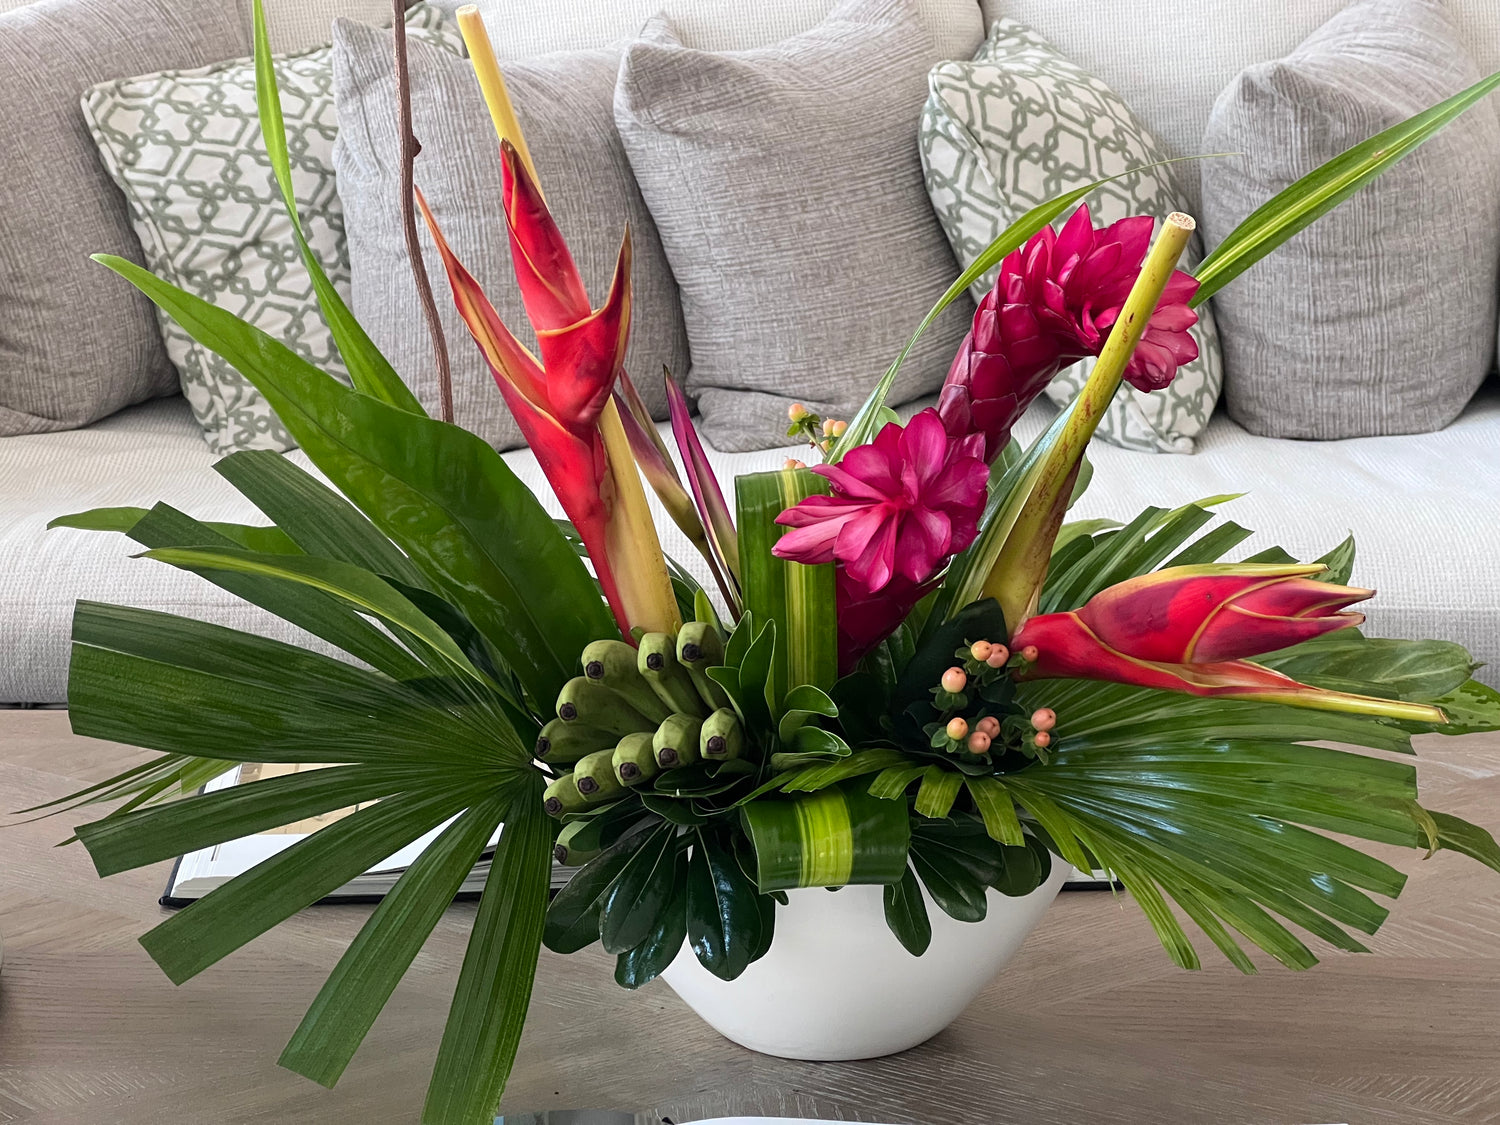 Tropical florals for lobby. Hotel floral arrangement. Tropical flowers. Hotel flowers. Hotel florist in Charleston.